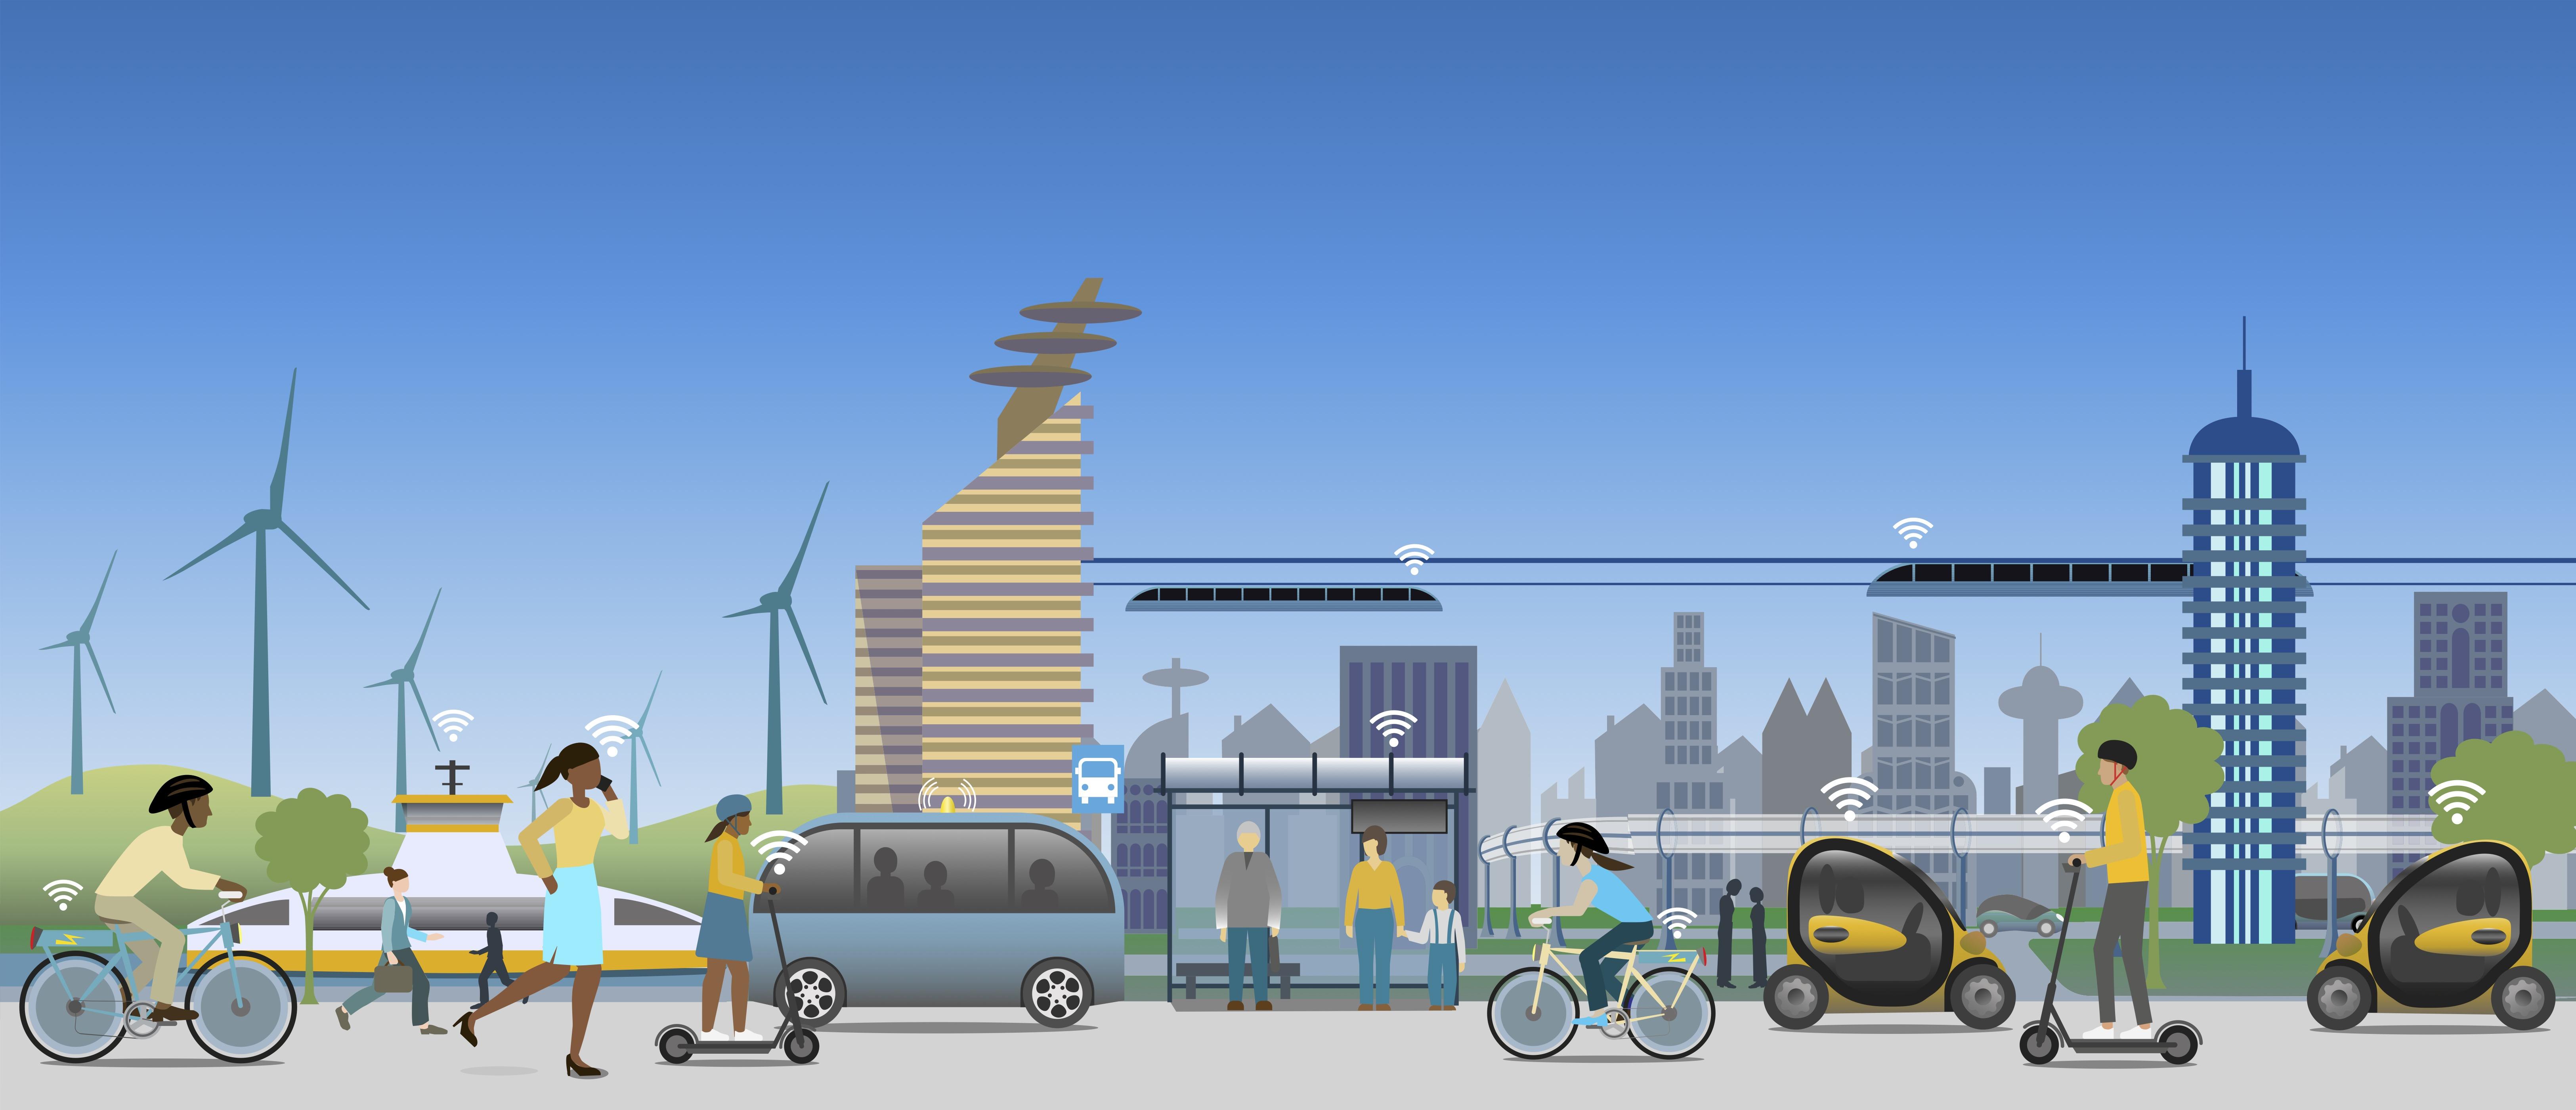 Illustration of multimodal transportation - including electric scooters, bikes, public transit, a ferry and vehicles -- against a city backdrop